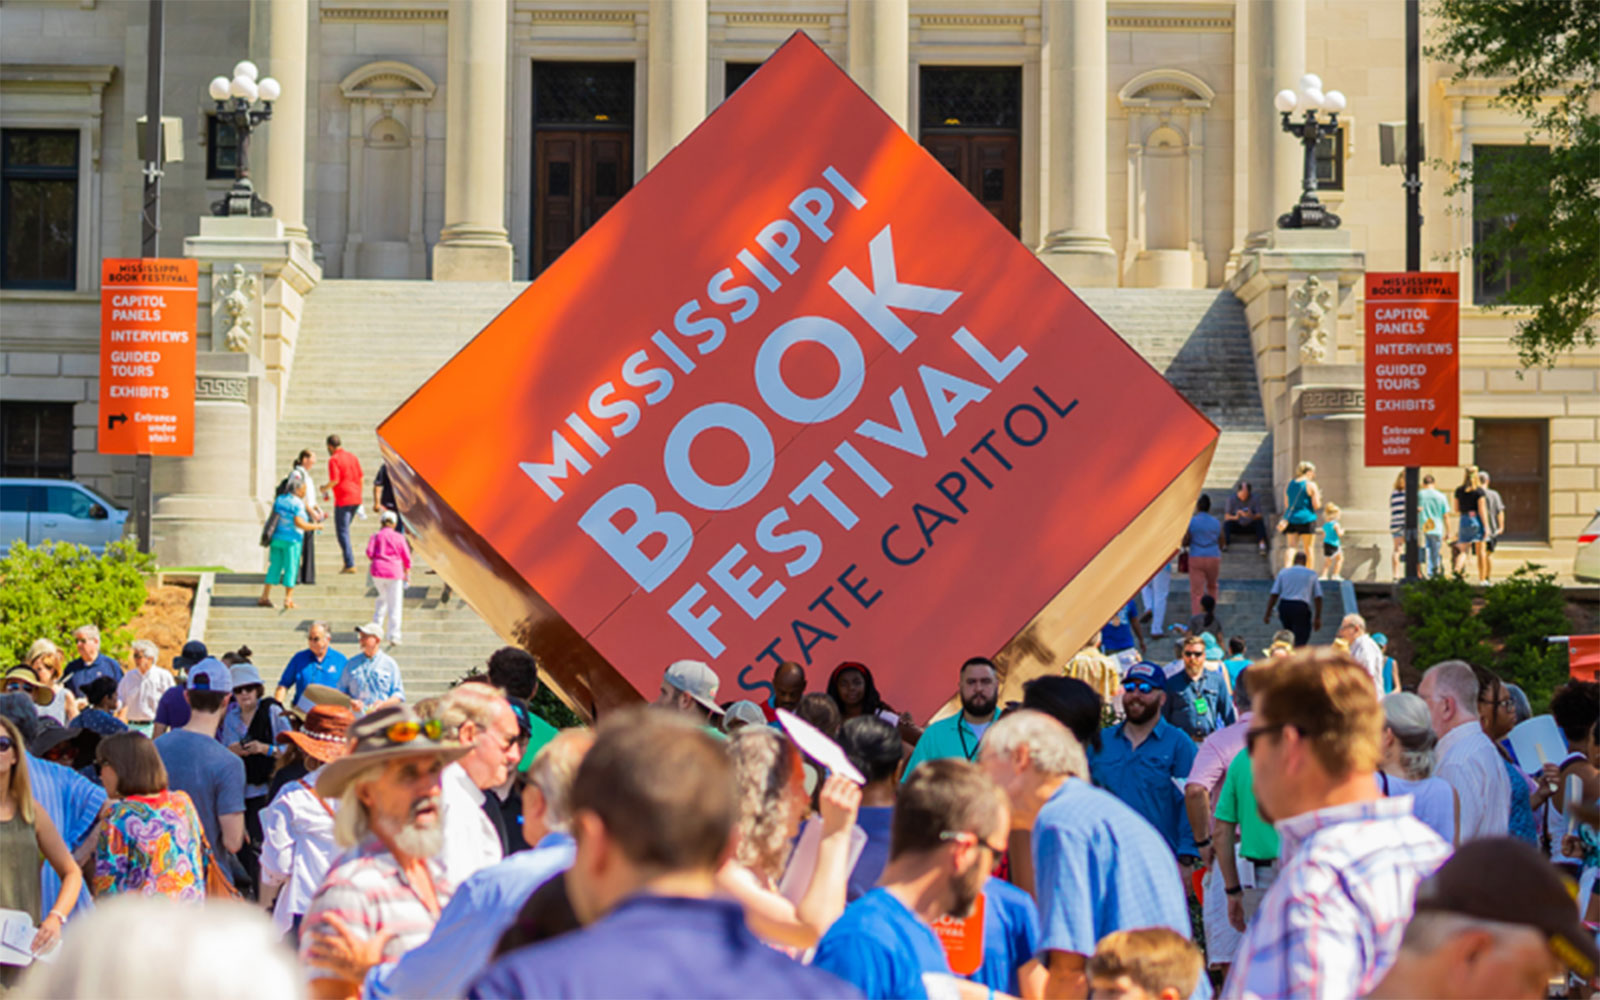 Mississippi Book Festival's Orange Cube Signage sitting out front of the State Capitol